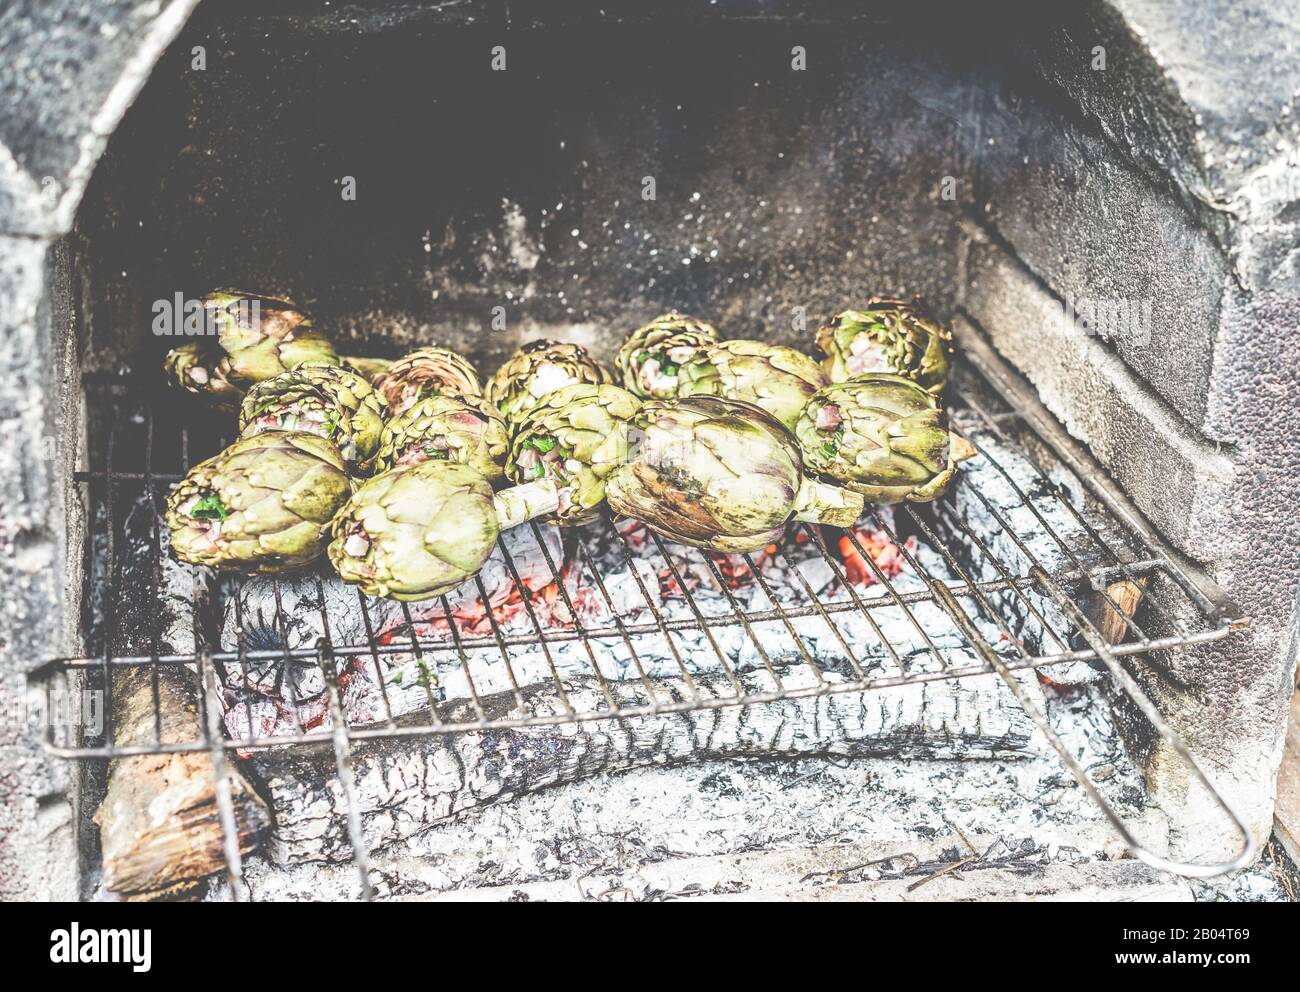 Cooked stuffed artichokes on wood barbecue grill - Vegetarian tasty dinner outdoor with friends - Focus on bottom right vegetables - Vintage contrast Stock Photo